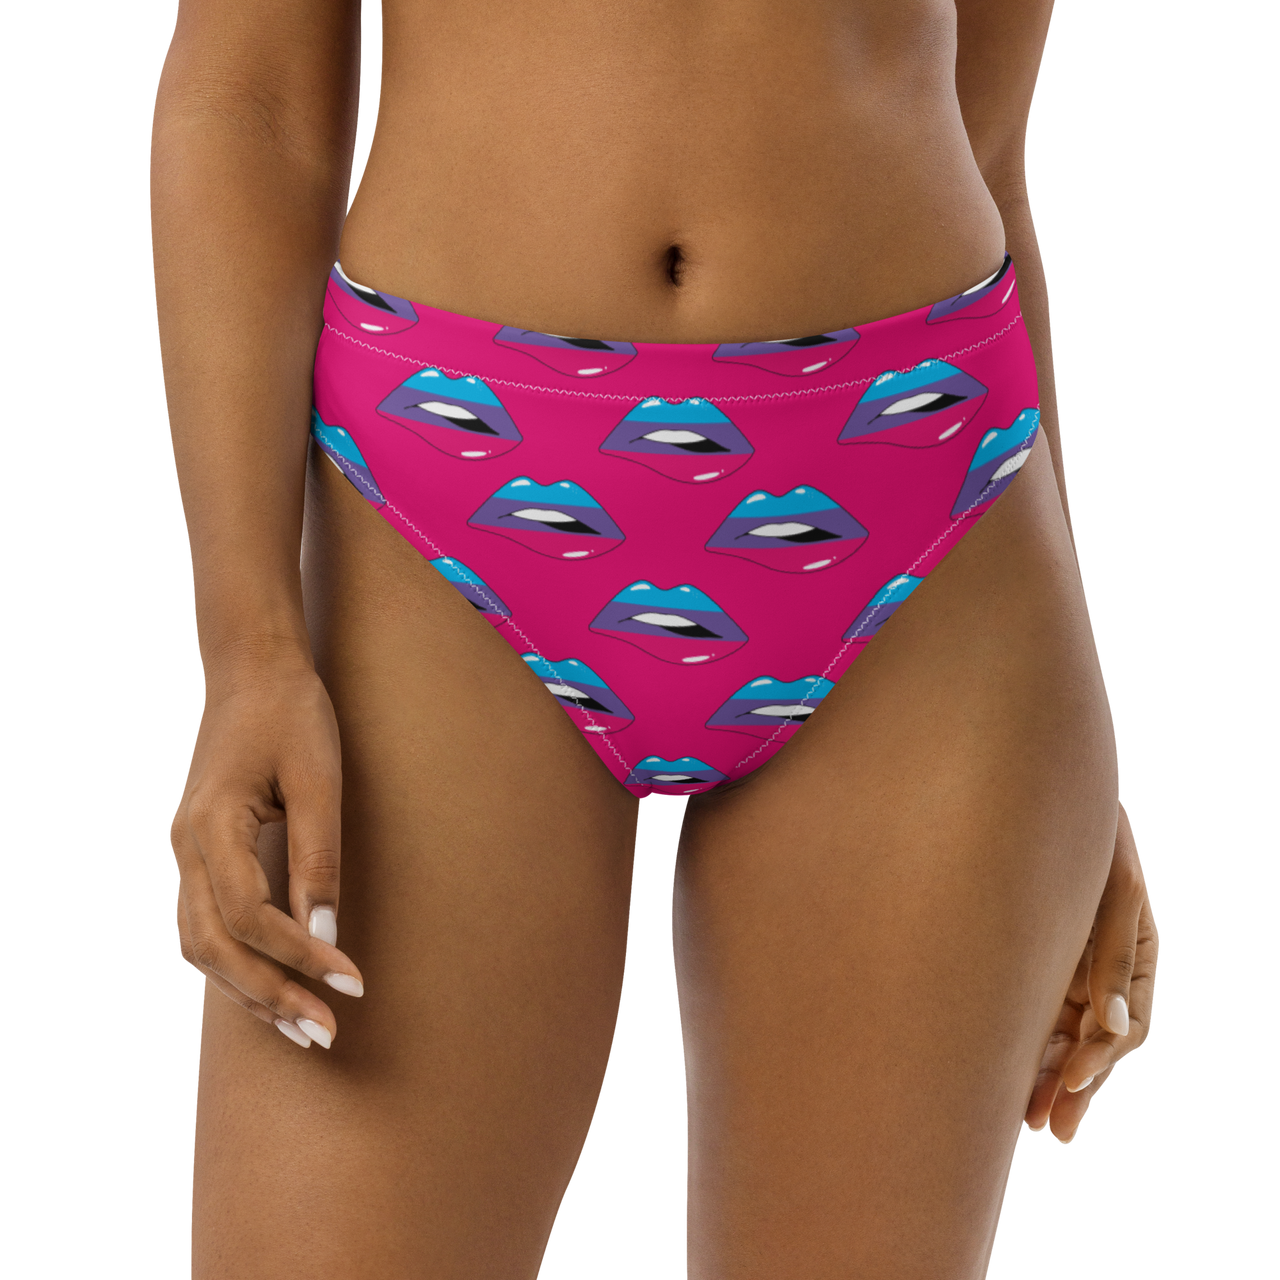 Androgyne Flag LGBTQ Kisses Underwear for They/Them Him/Her - Pink SHAVA